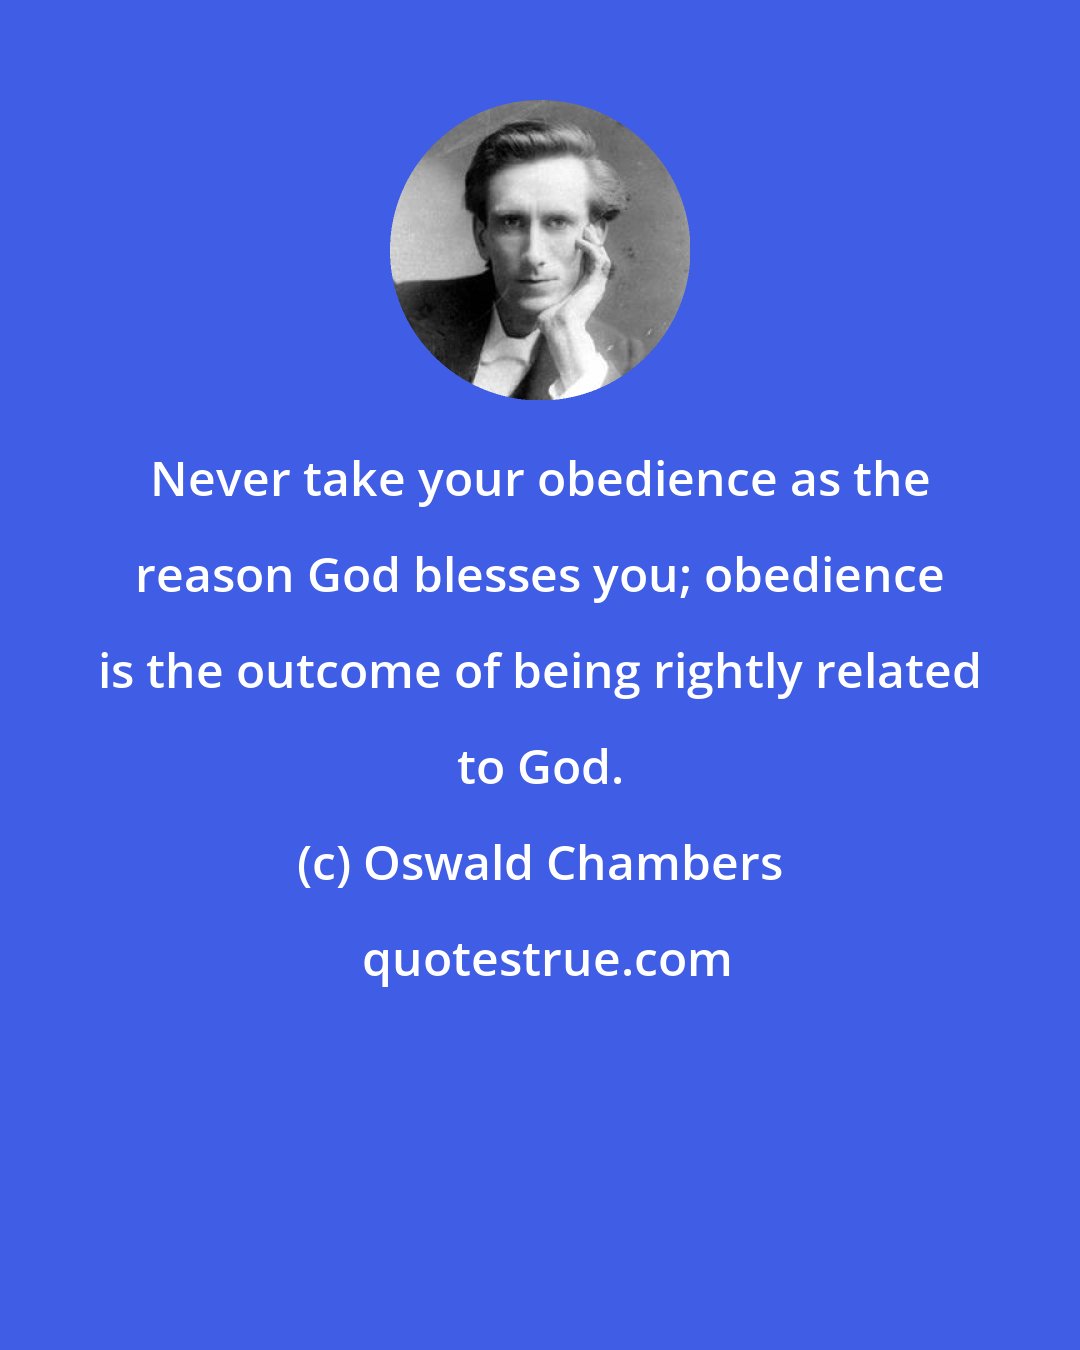 Oswald Chambers: Never take your obedience as the reason God blesses you; obedience is the outcome of being rightly related to God.